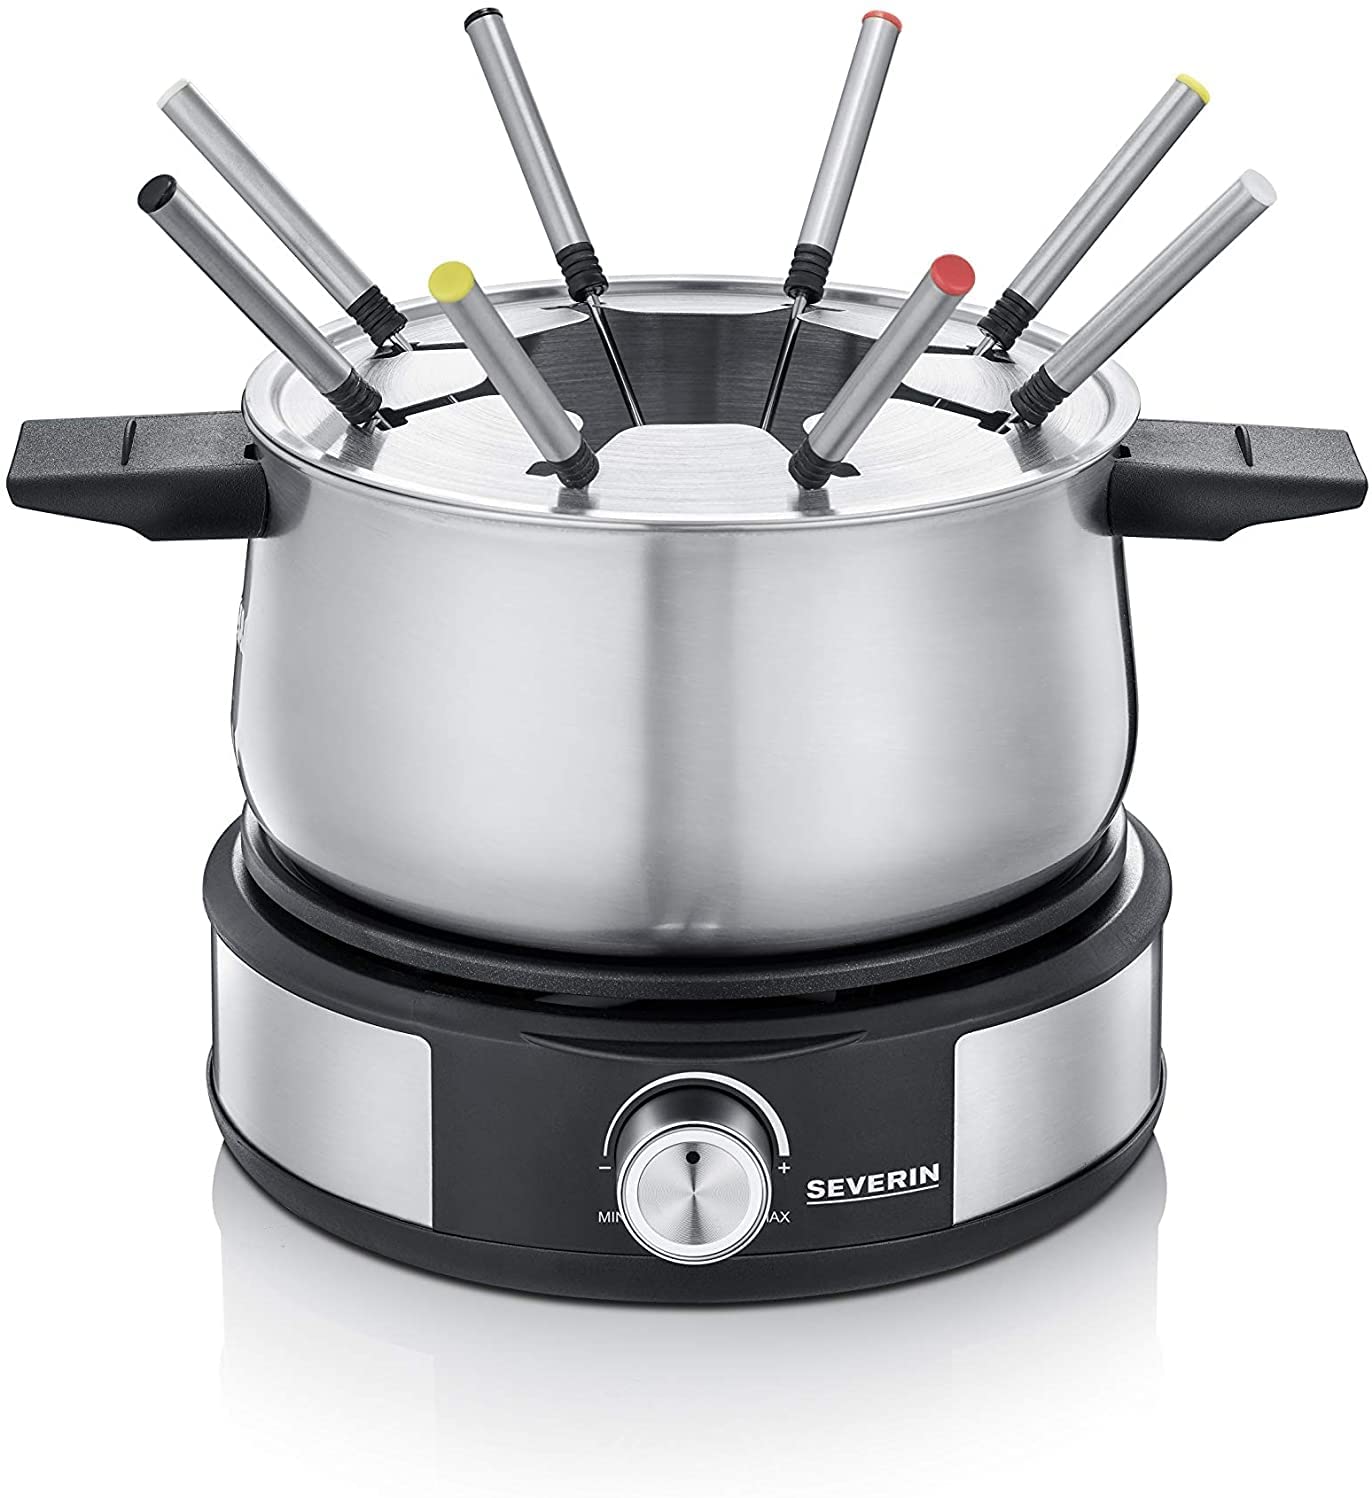 SEVERIN FO 2471 Fondue Crepes Combination, Dishwasher-Safe Fondue Set with 8 Colour-Coded Forks, Stainless Steel Fondue Crepes Maker Combination for Fondue or Crepes, Black